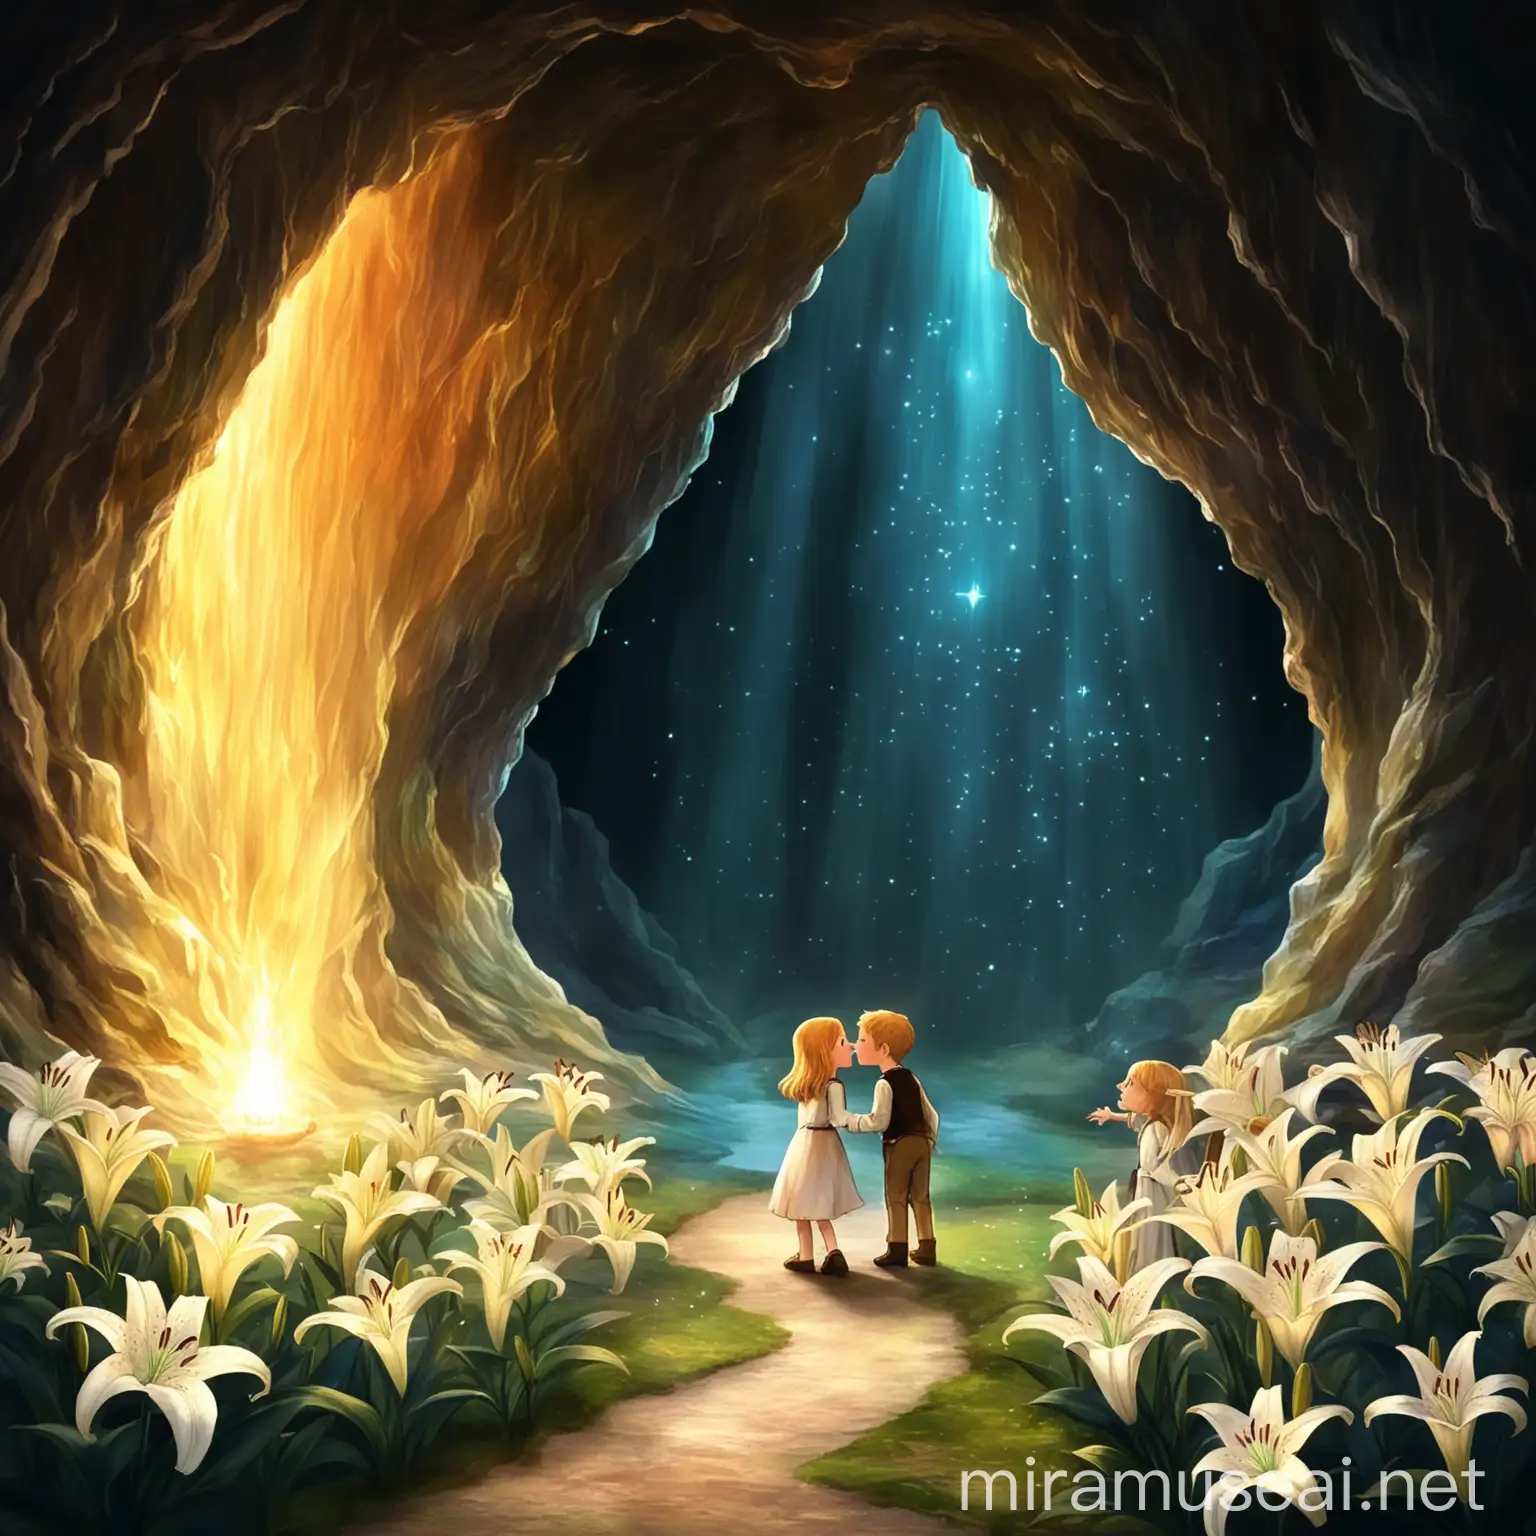 Lily and Arthur Encounter a Magical Wishing Cave